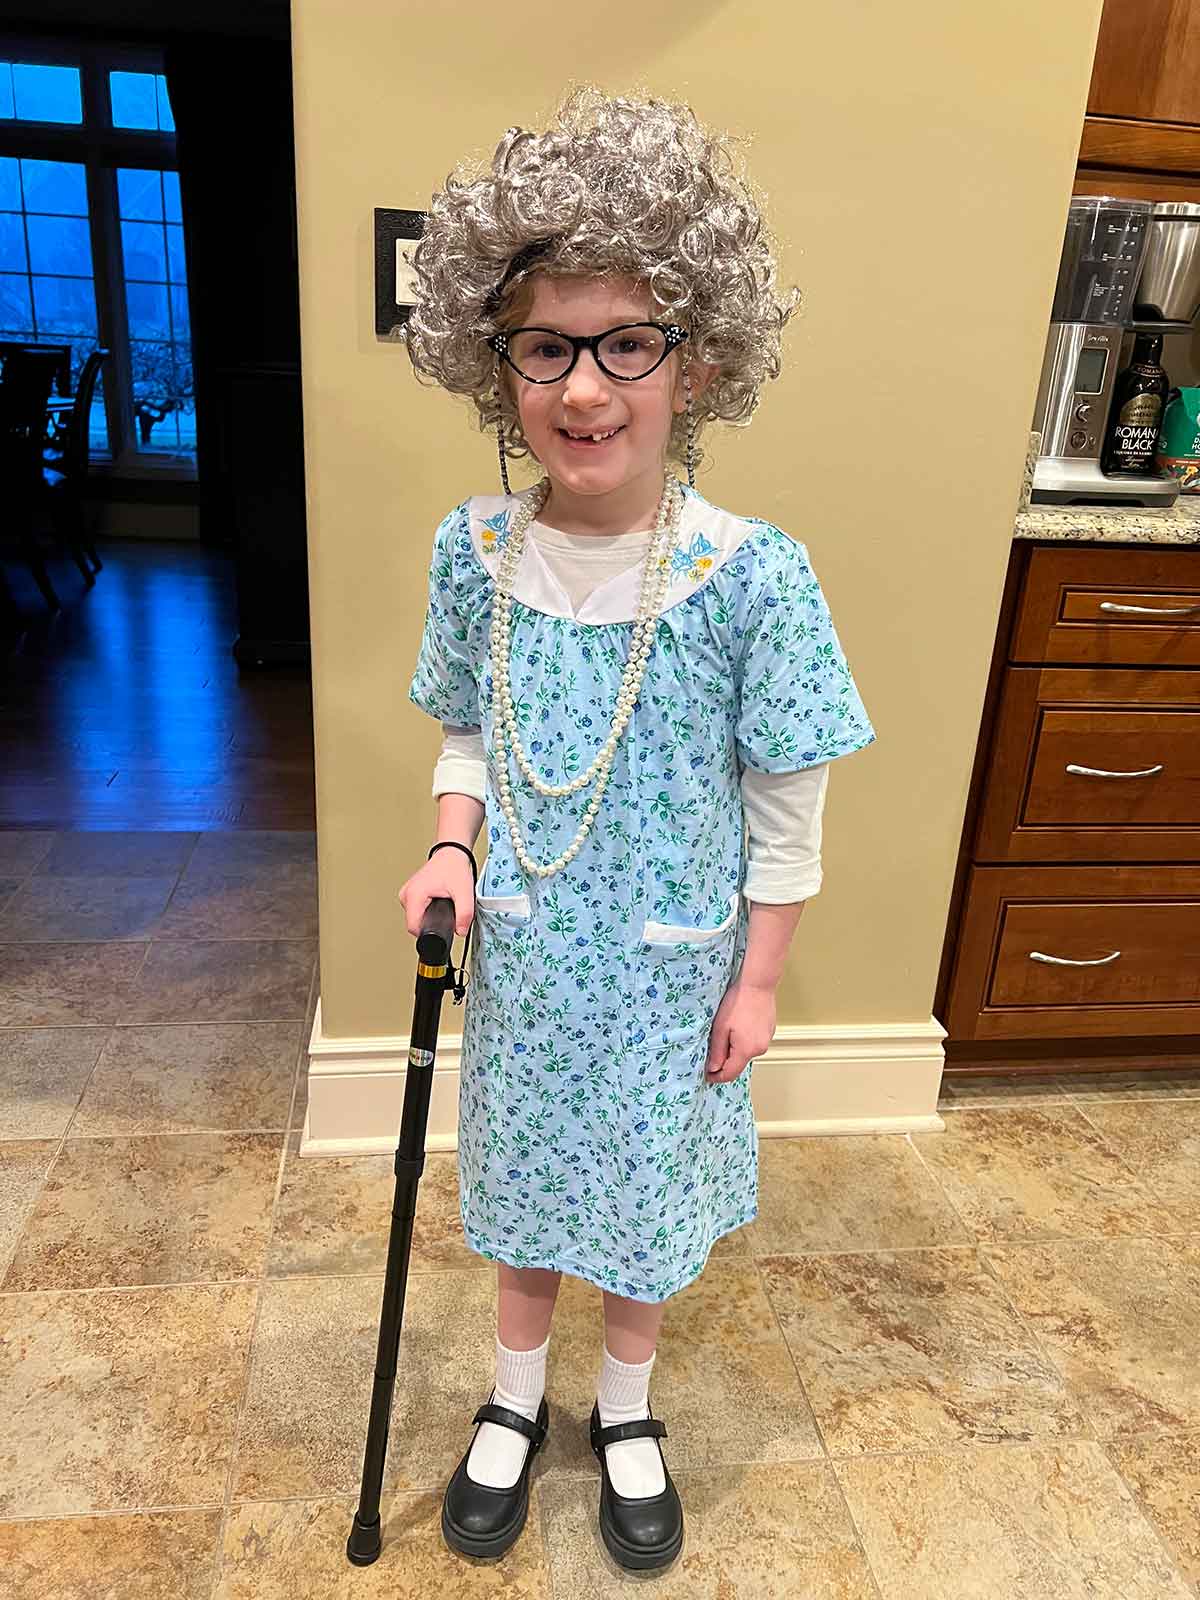 Little girl dressed in an old lady costume and holding a cane.